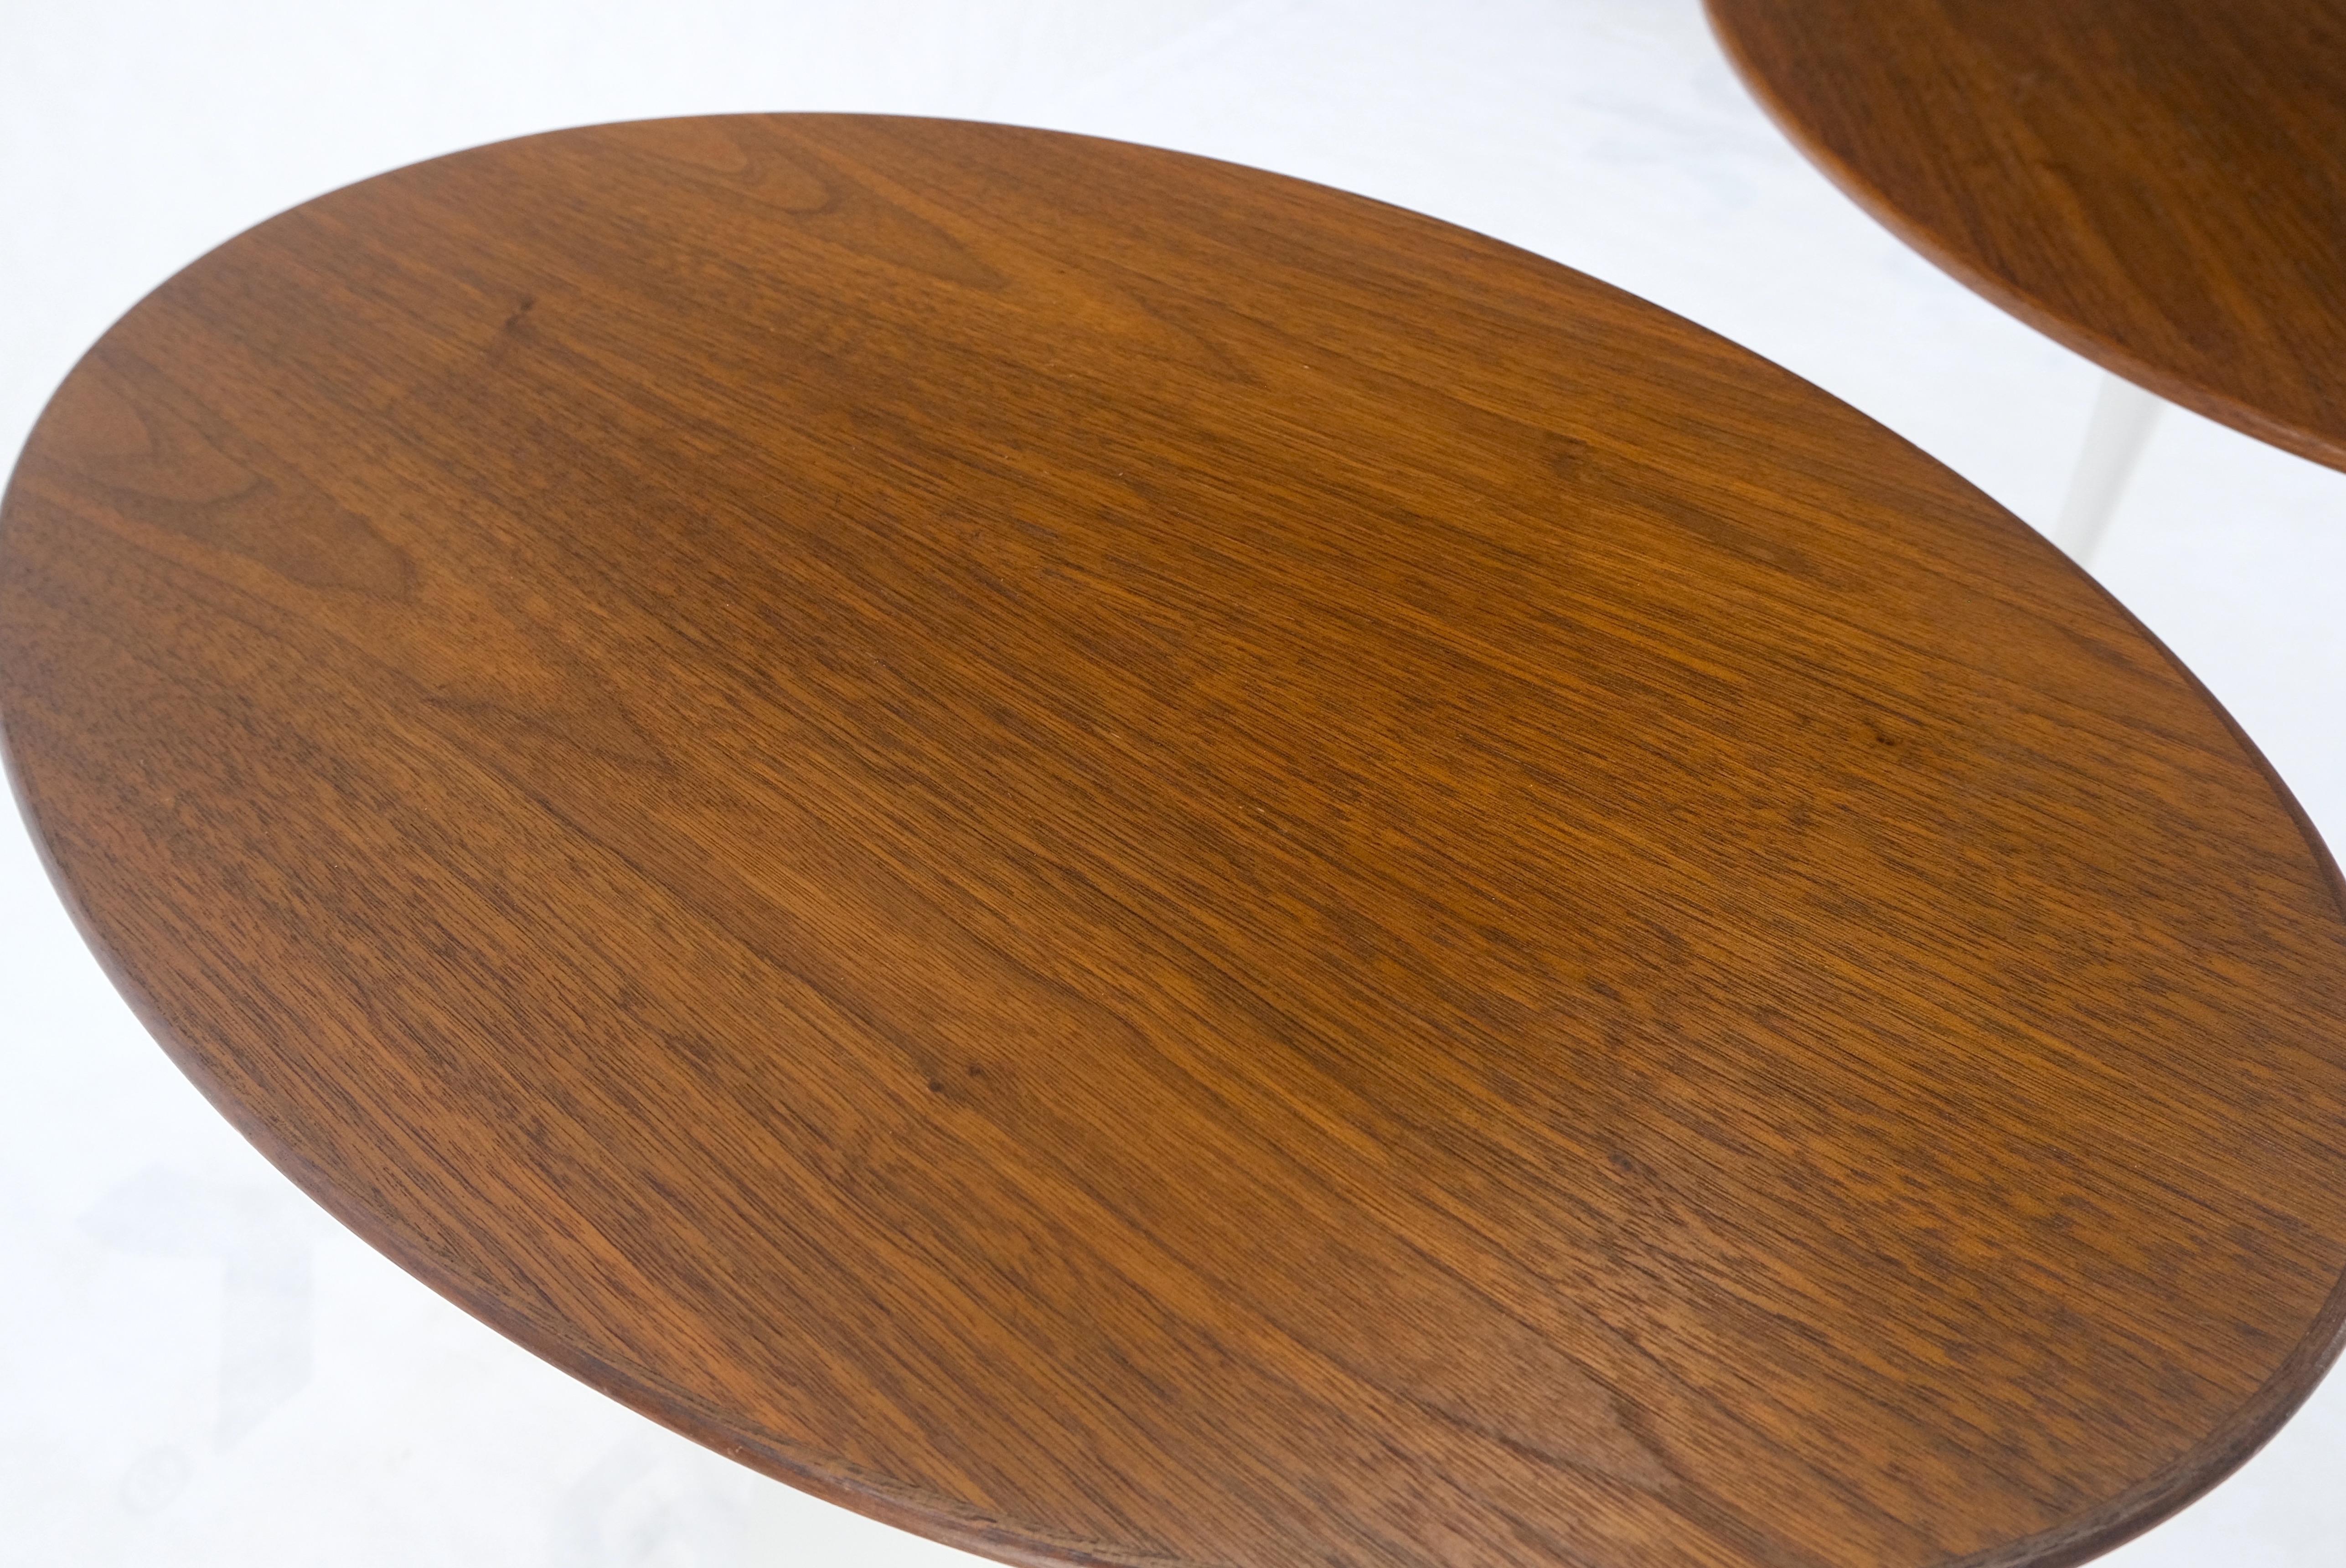 Painted Pair of Knoll Saarinen Oval Walnut Tulip Side End Tables Stands Mint! For Sale